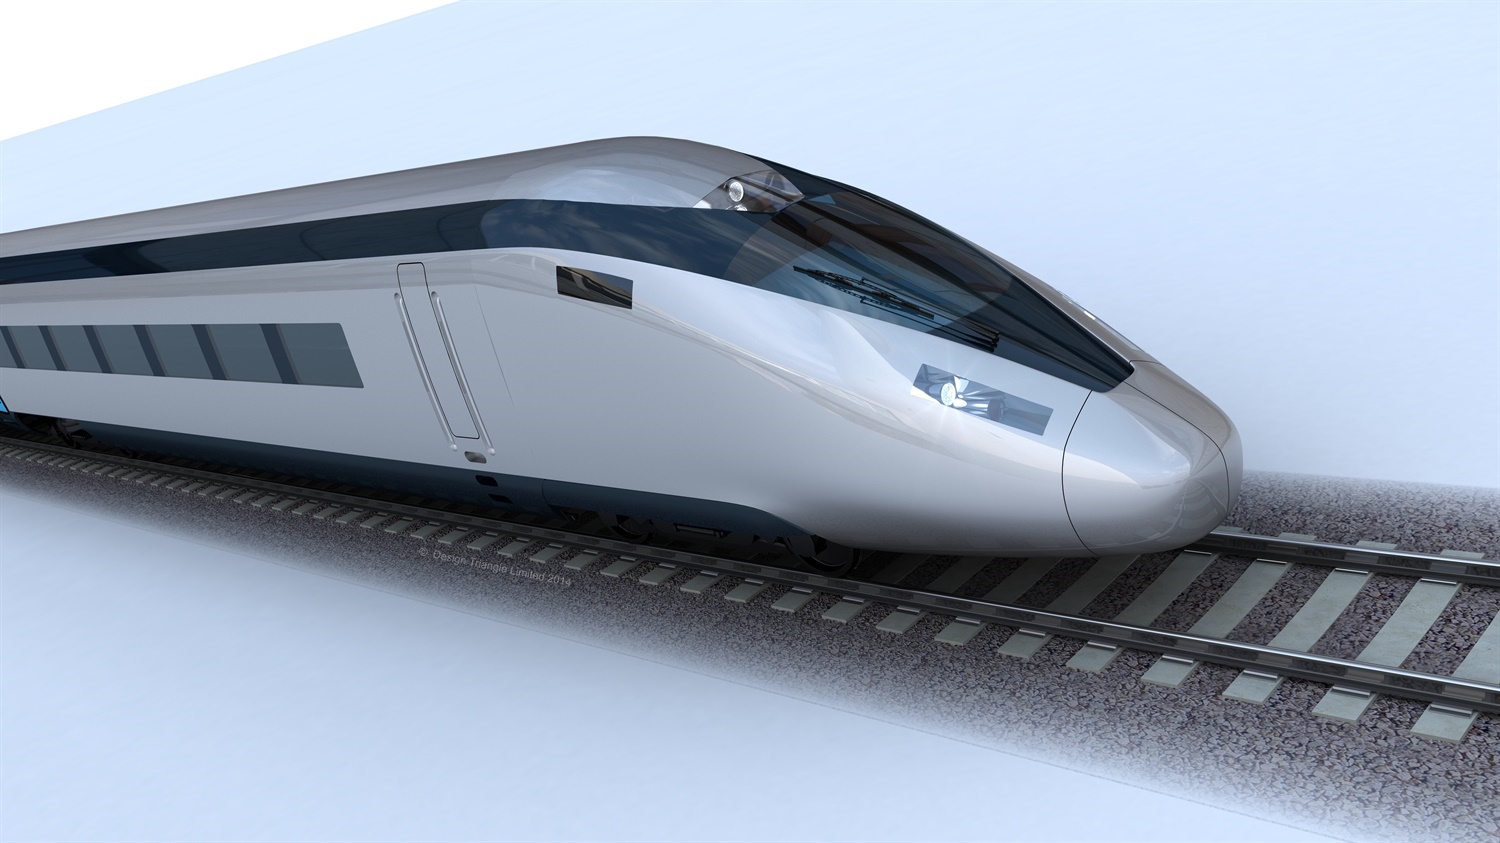 More than £10m spent already on HS2 legal fees